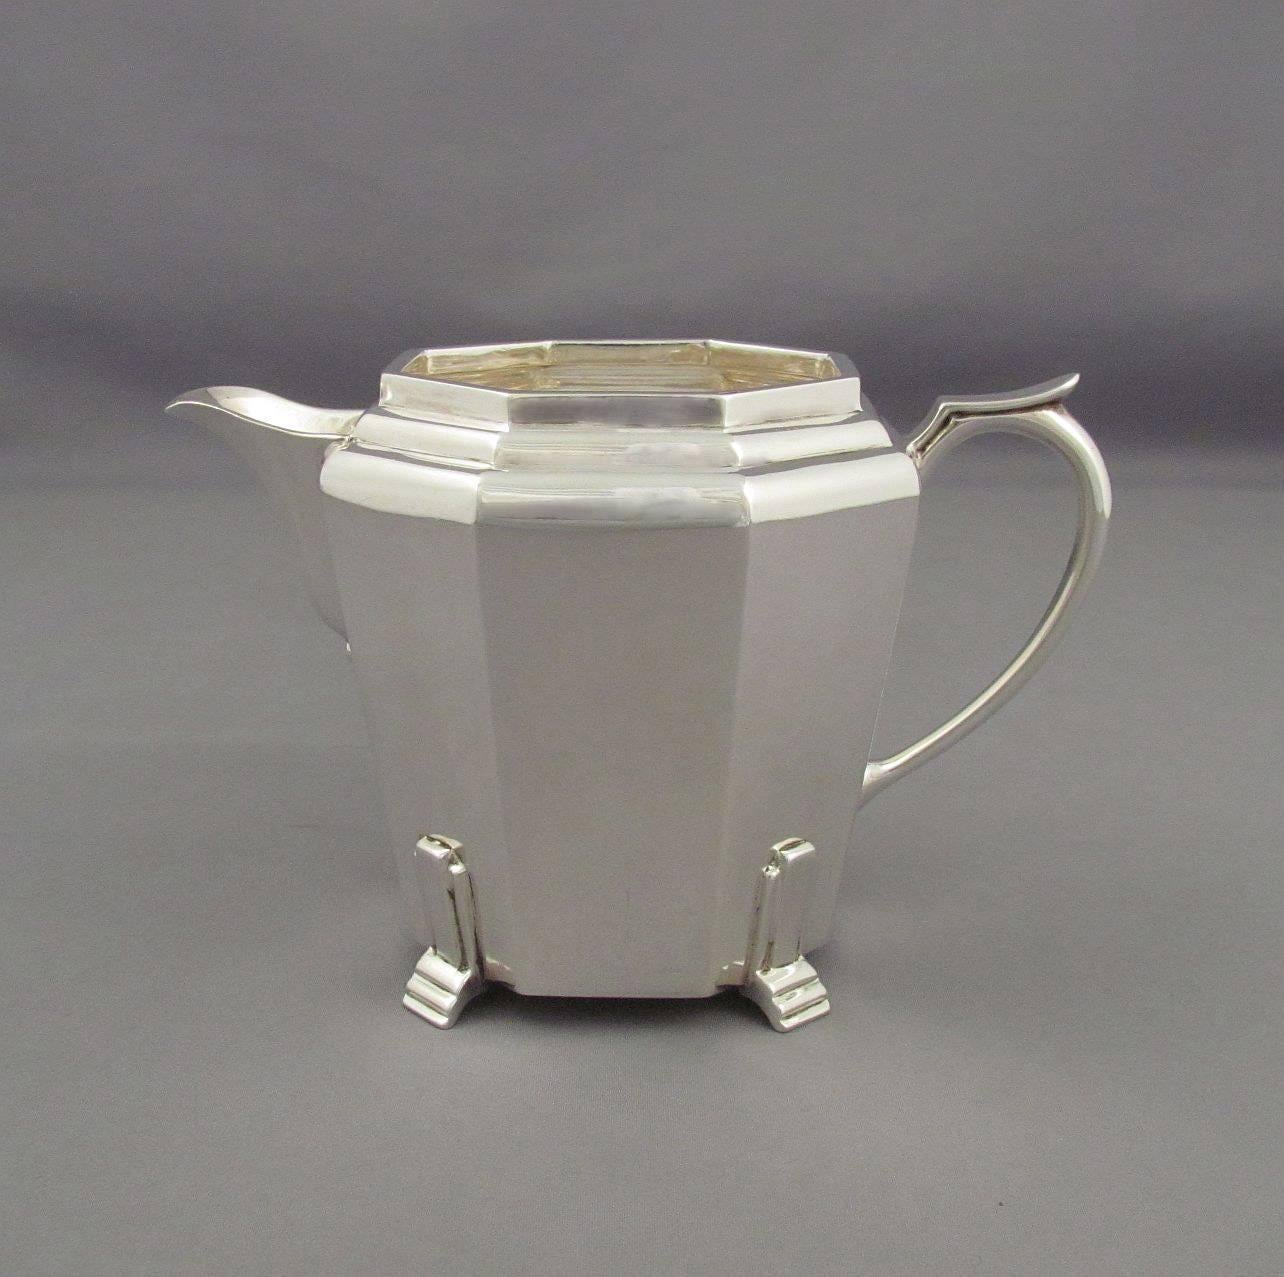 A handsome English sterling silver tea service in the Art Deco style hallmarked Sheffield 1938 by Thomas Bradbury & Sons. Fine quality and good weight. Teapot is 10"(25.5cm) from spout to handle and has a four cup (one litre) capacity,